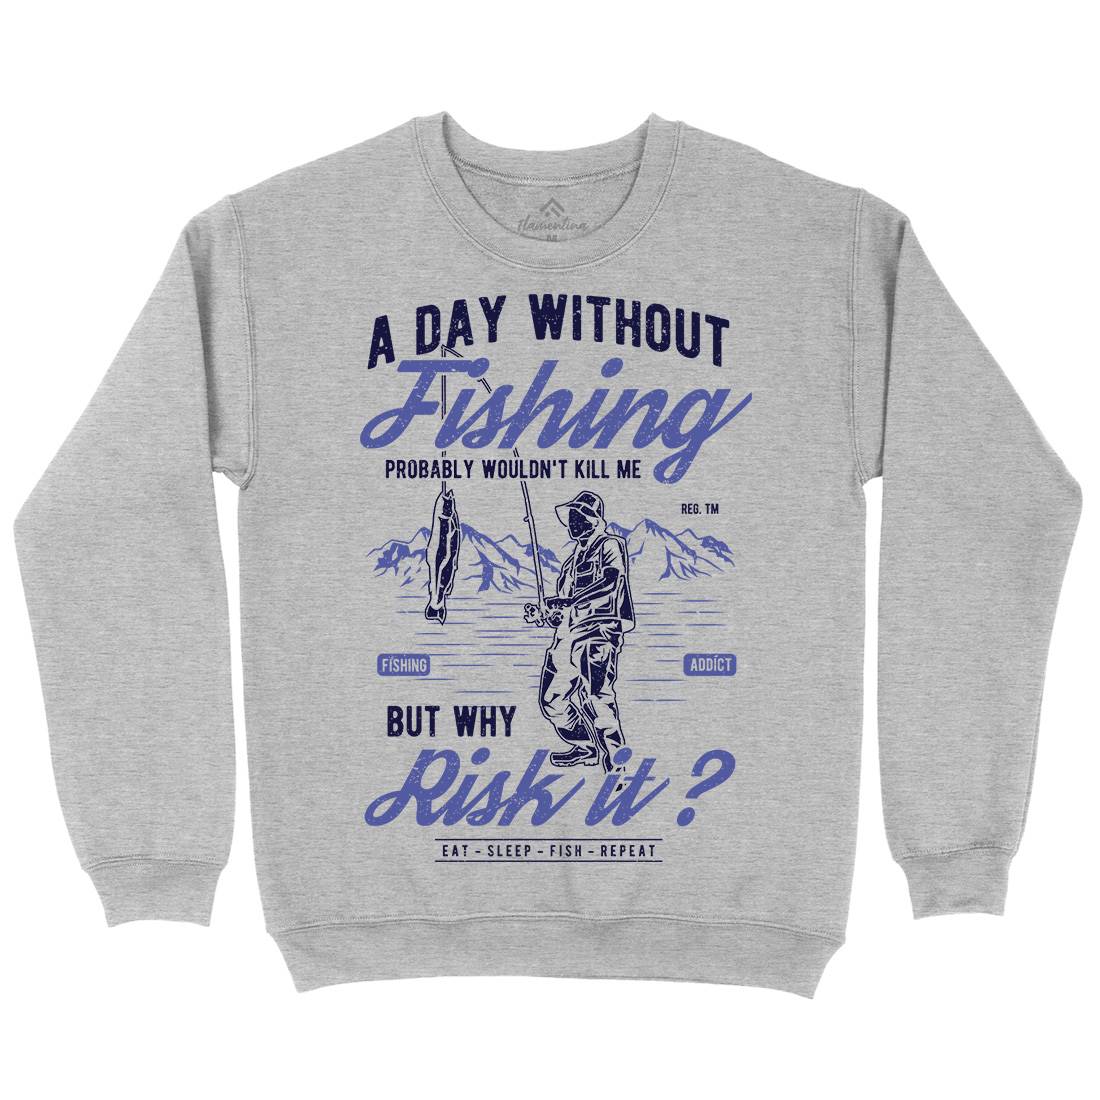 A Day Without Mens Crew Neck Sweatshirt Fishing A602